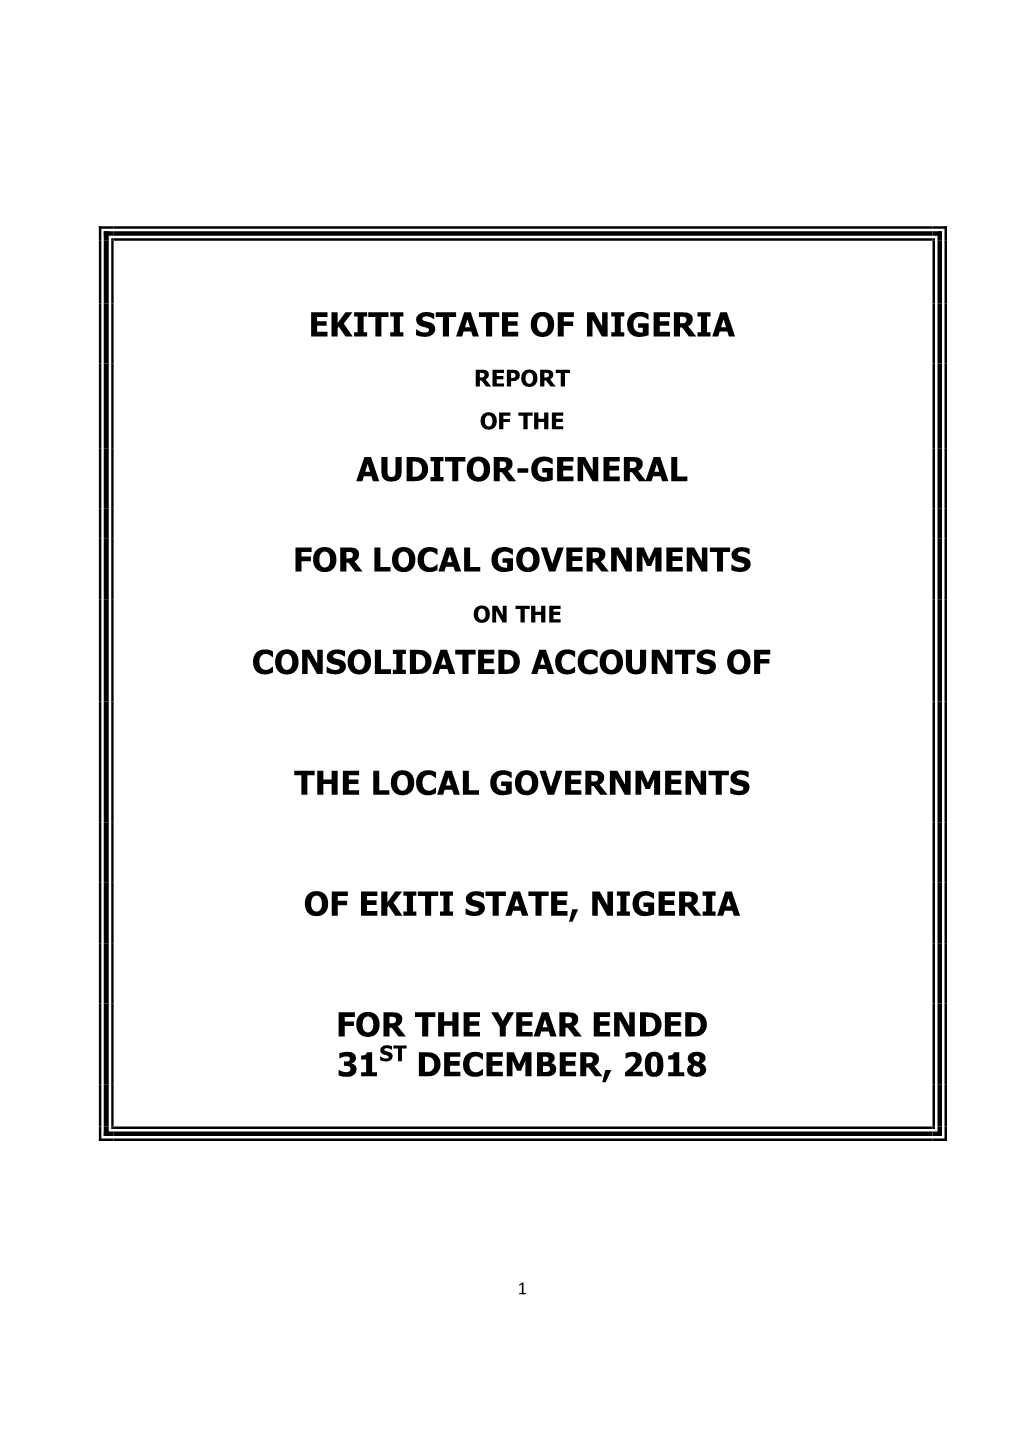 Consolidated Accounts of the Local Governments of Ekiti State, Nigeria